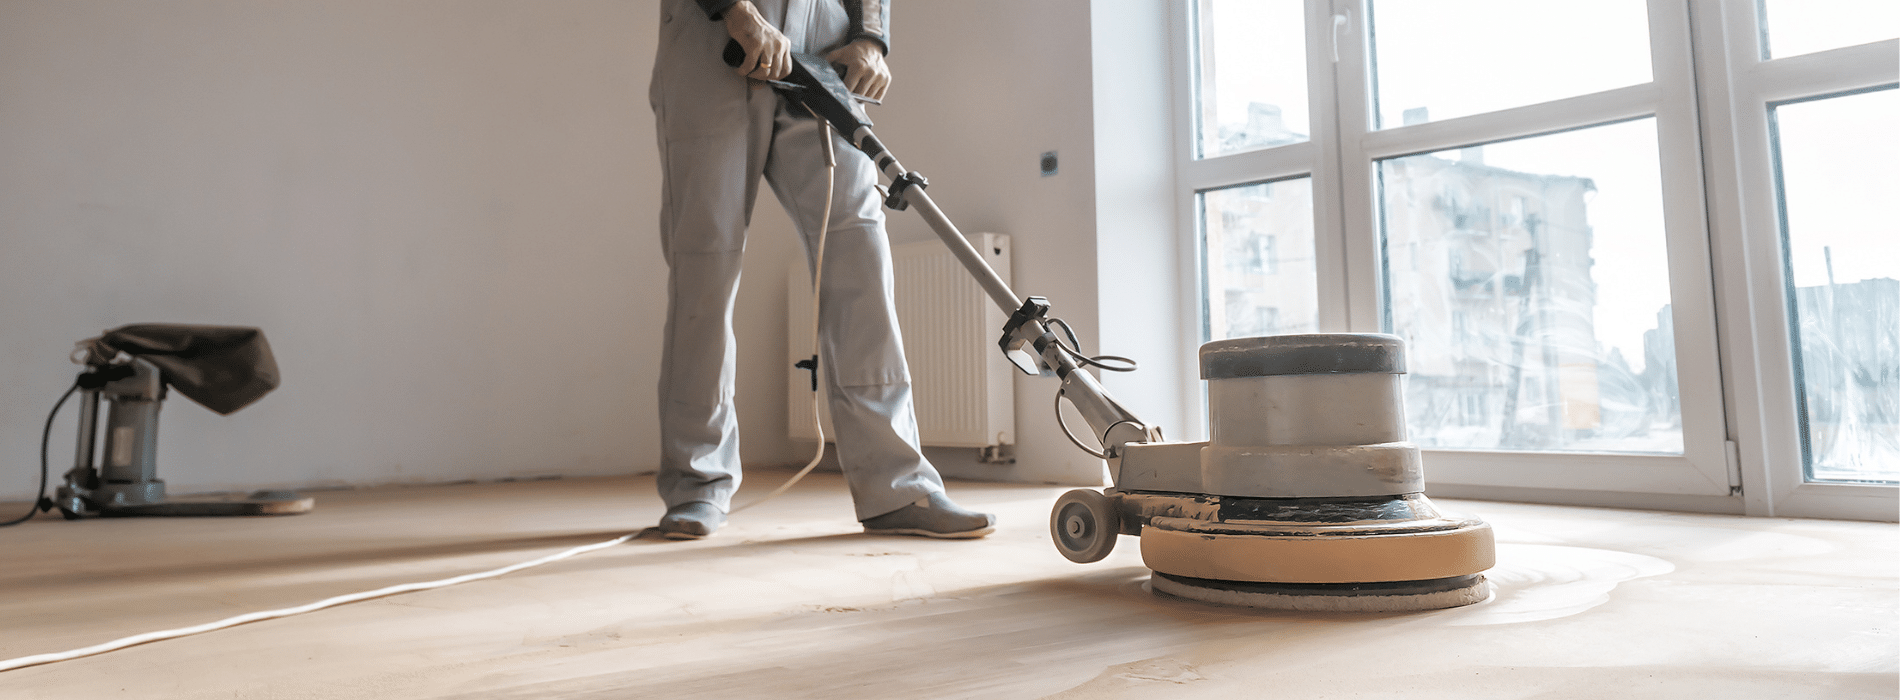 In Erith, DA18, Mr Sander® use Bona FlexiSand 1.5 (Ø 407 mm) for parquet floor sanding. Direction-free sanding down to bare wood with 1.5 kW power. Connected to HEPA-filtered dust extraction for clean and efficient results.